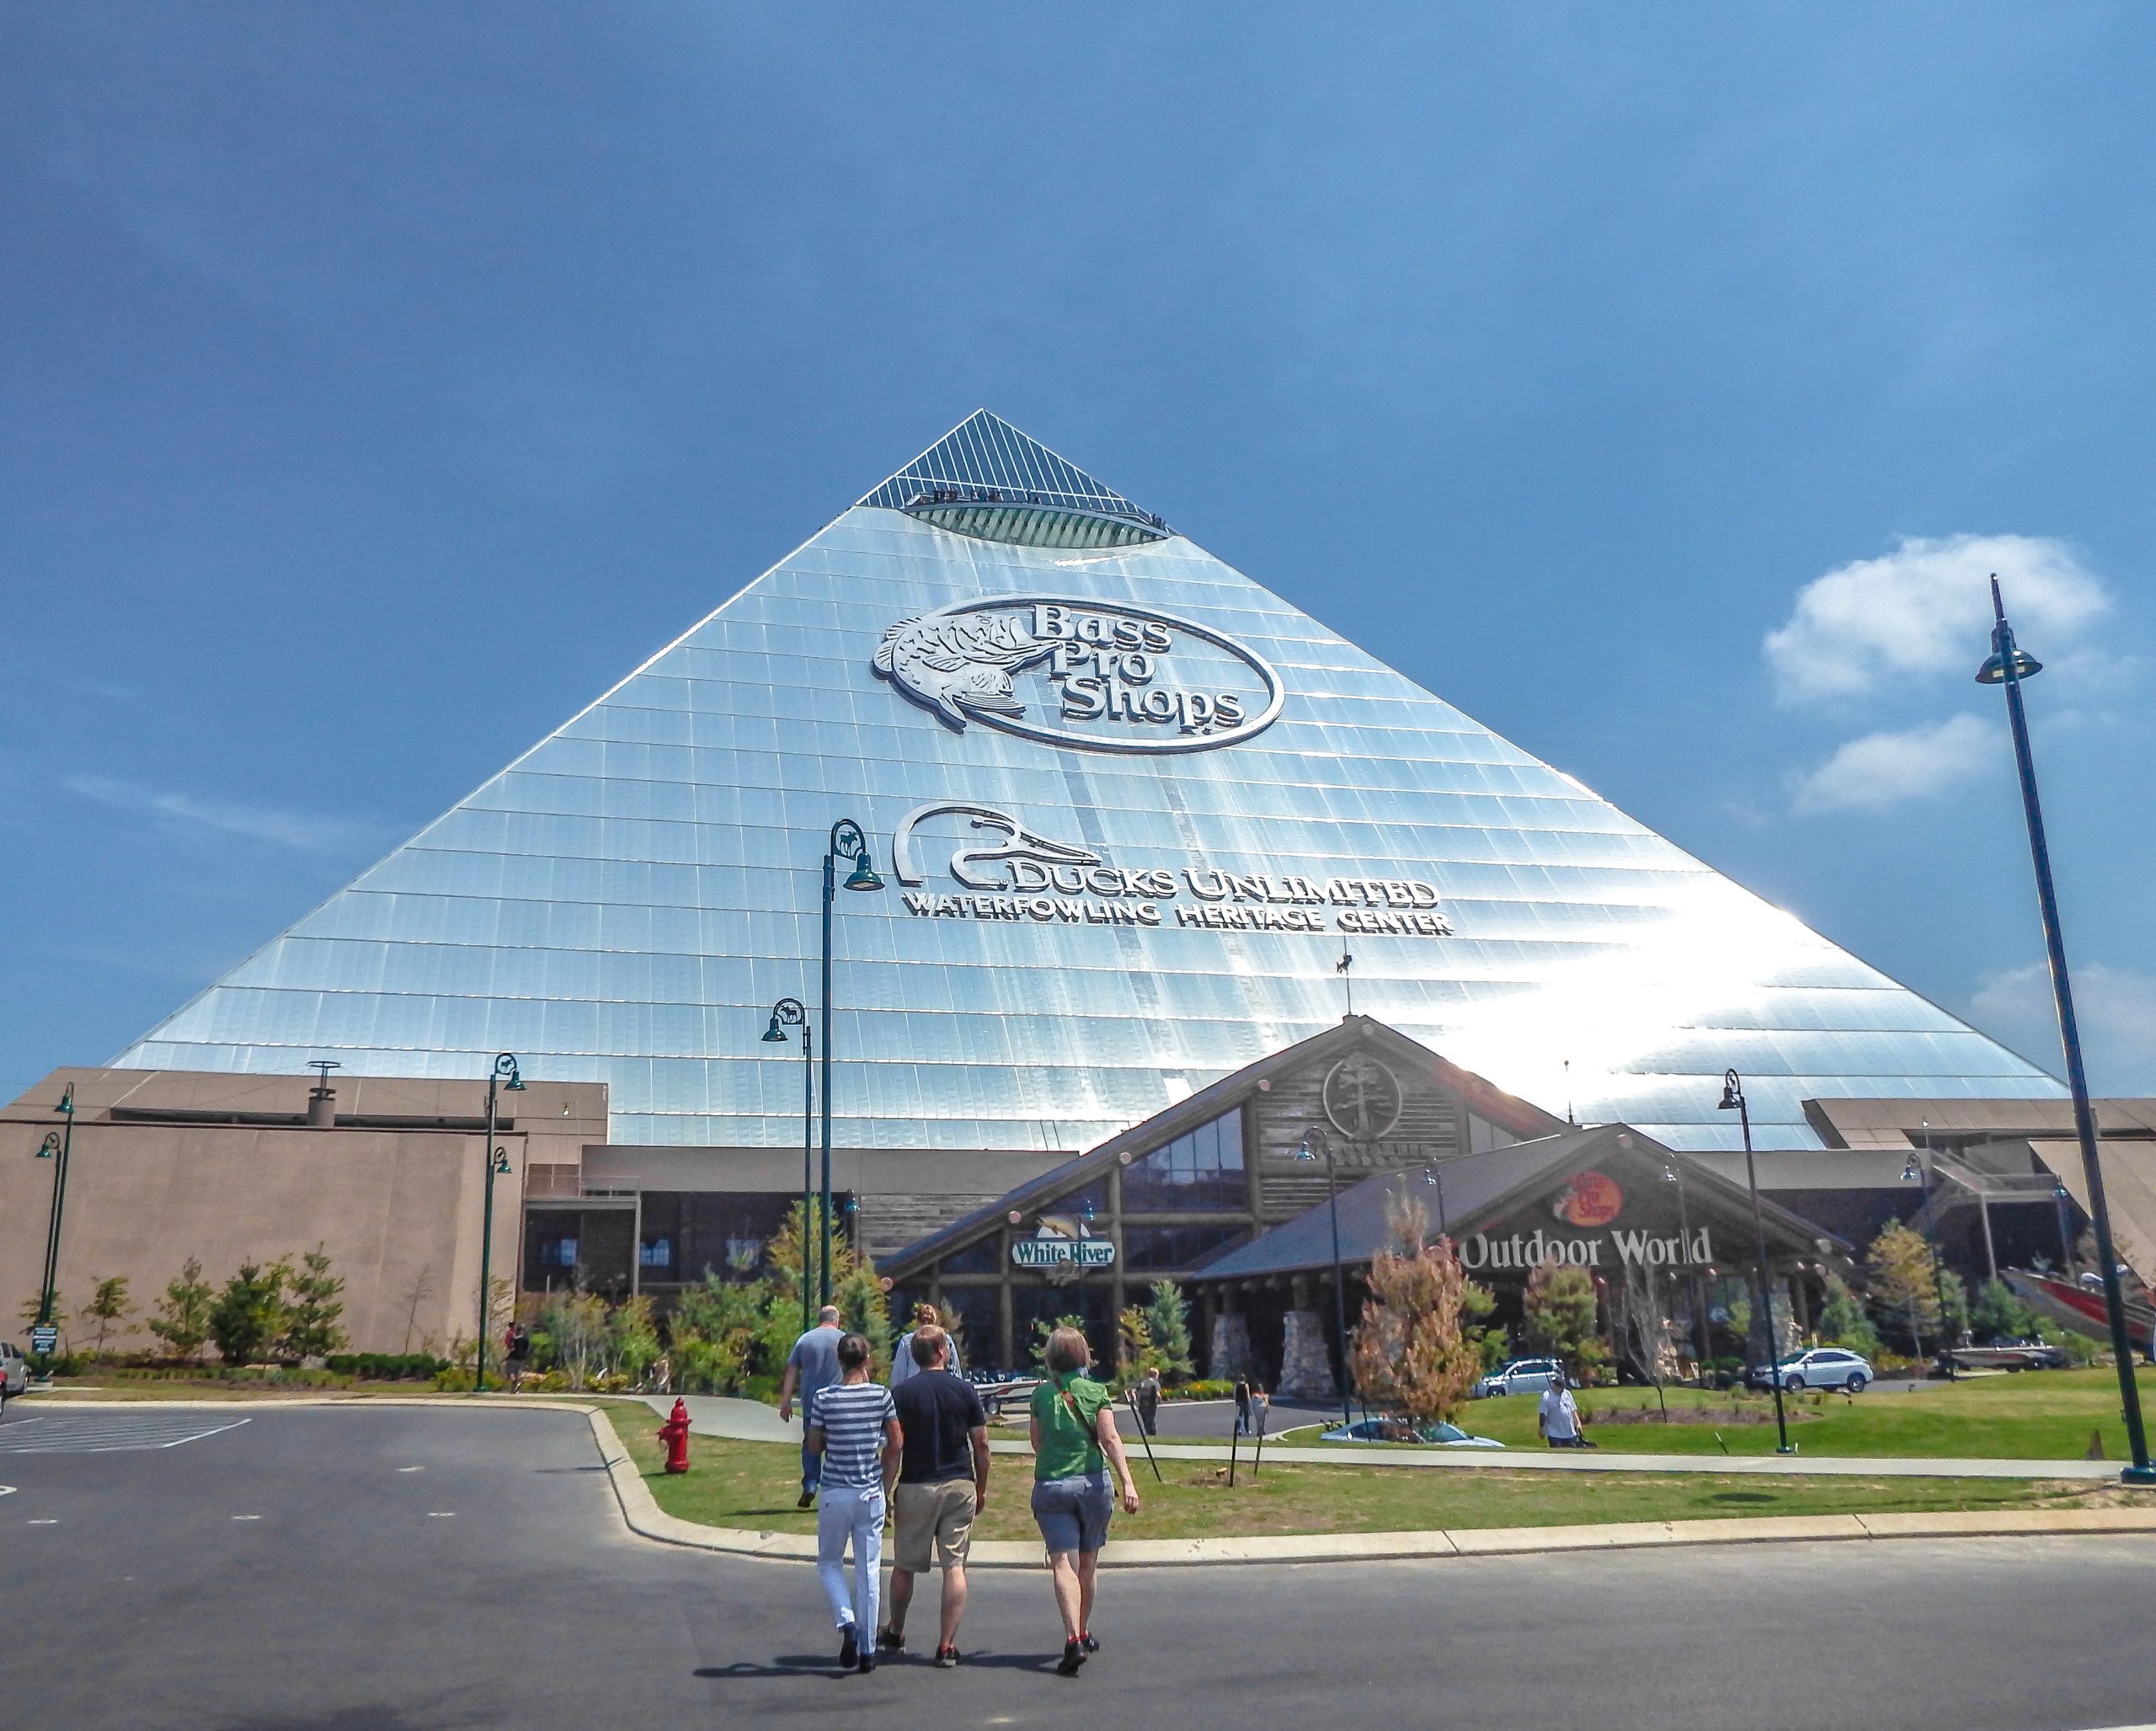 Memphis, Tennessee is weird. Bass Pro Shop at the Pyramid